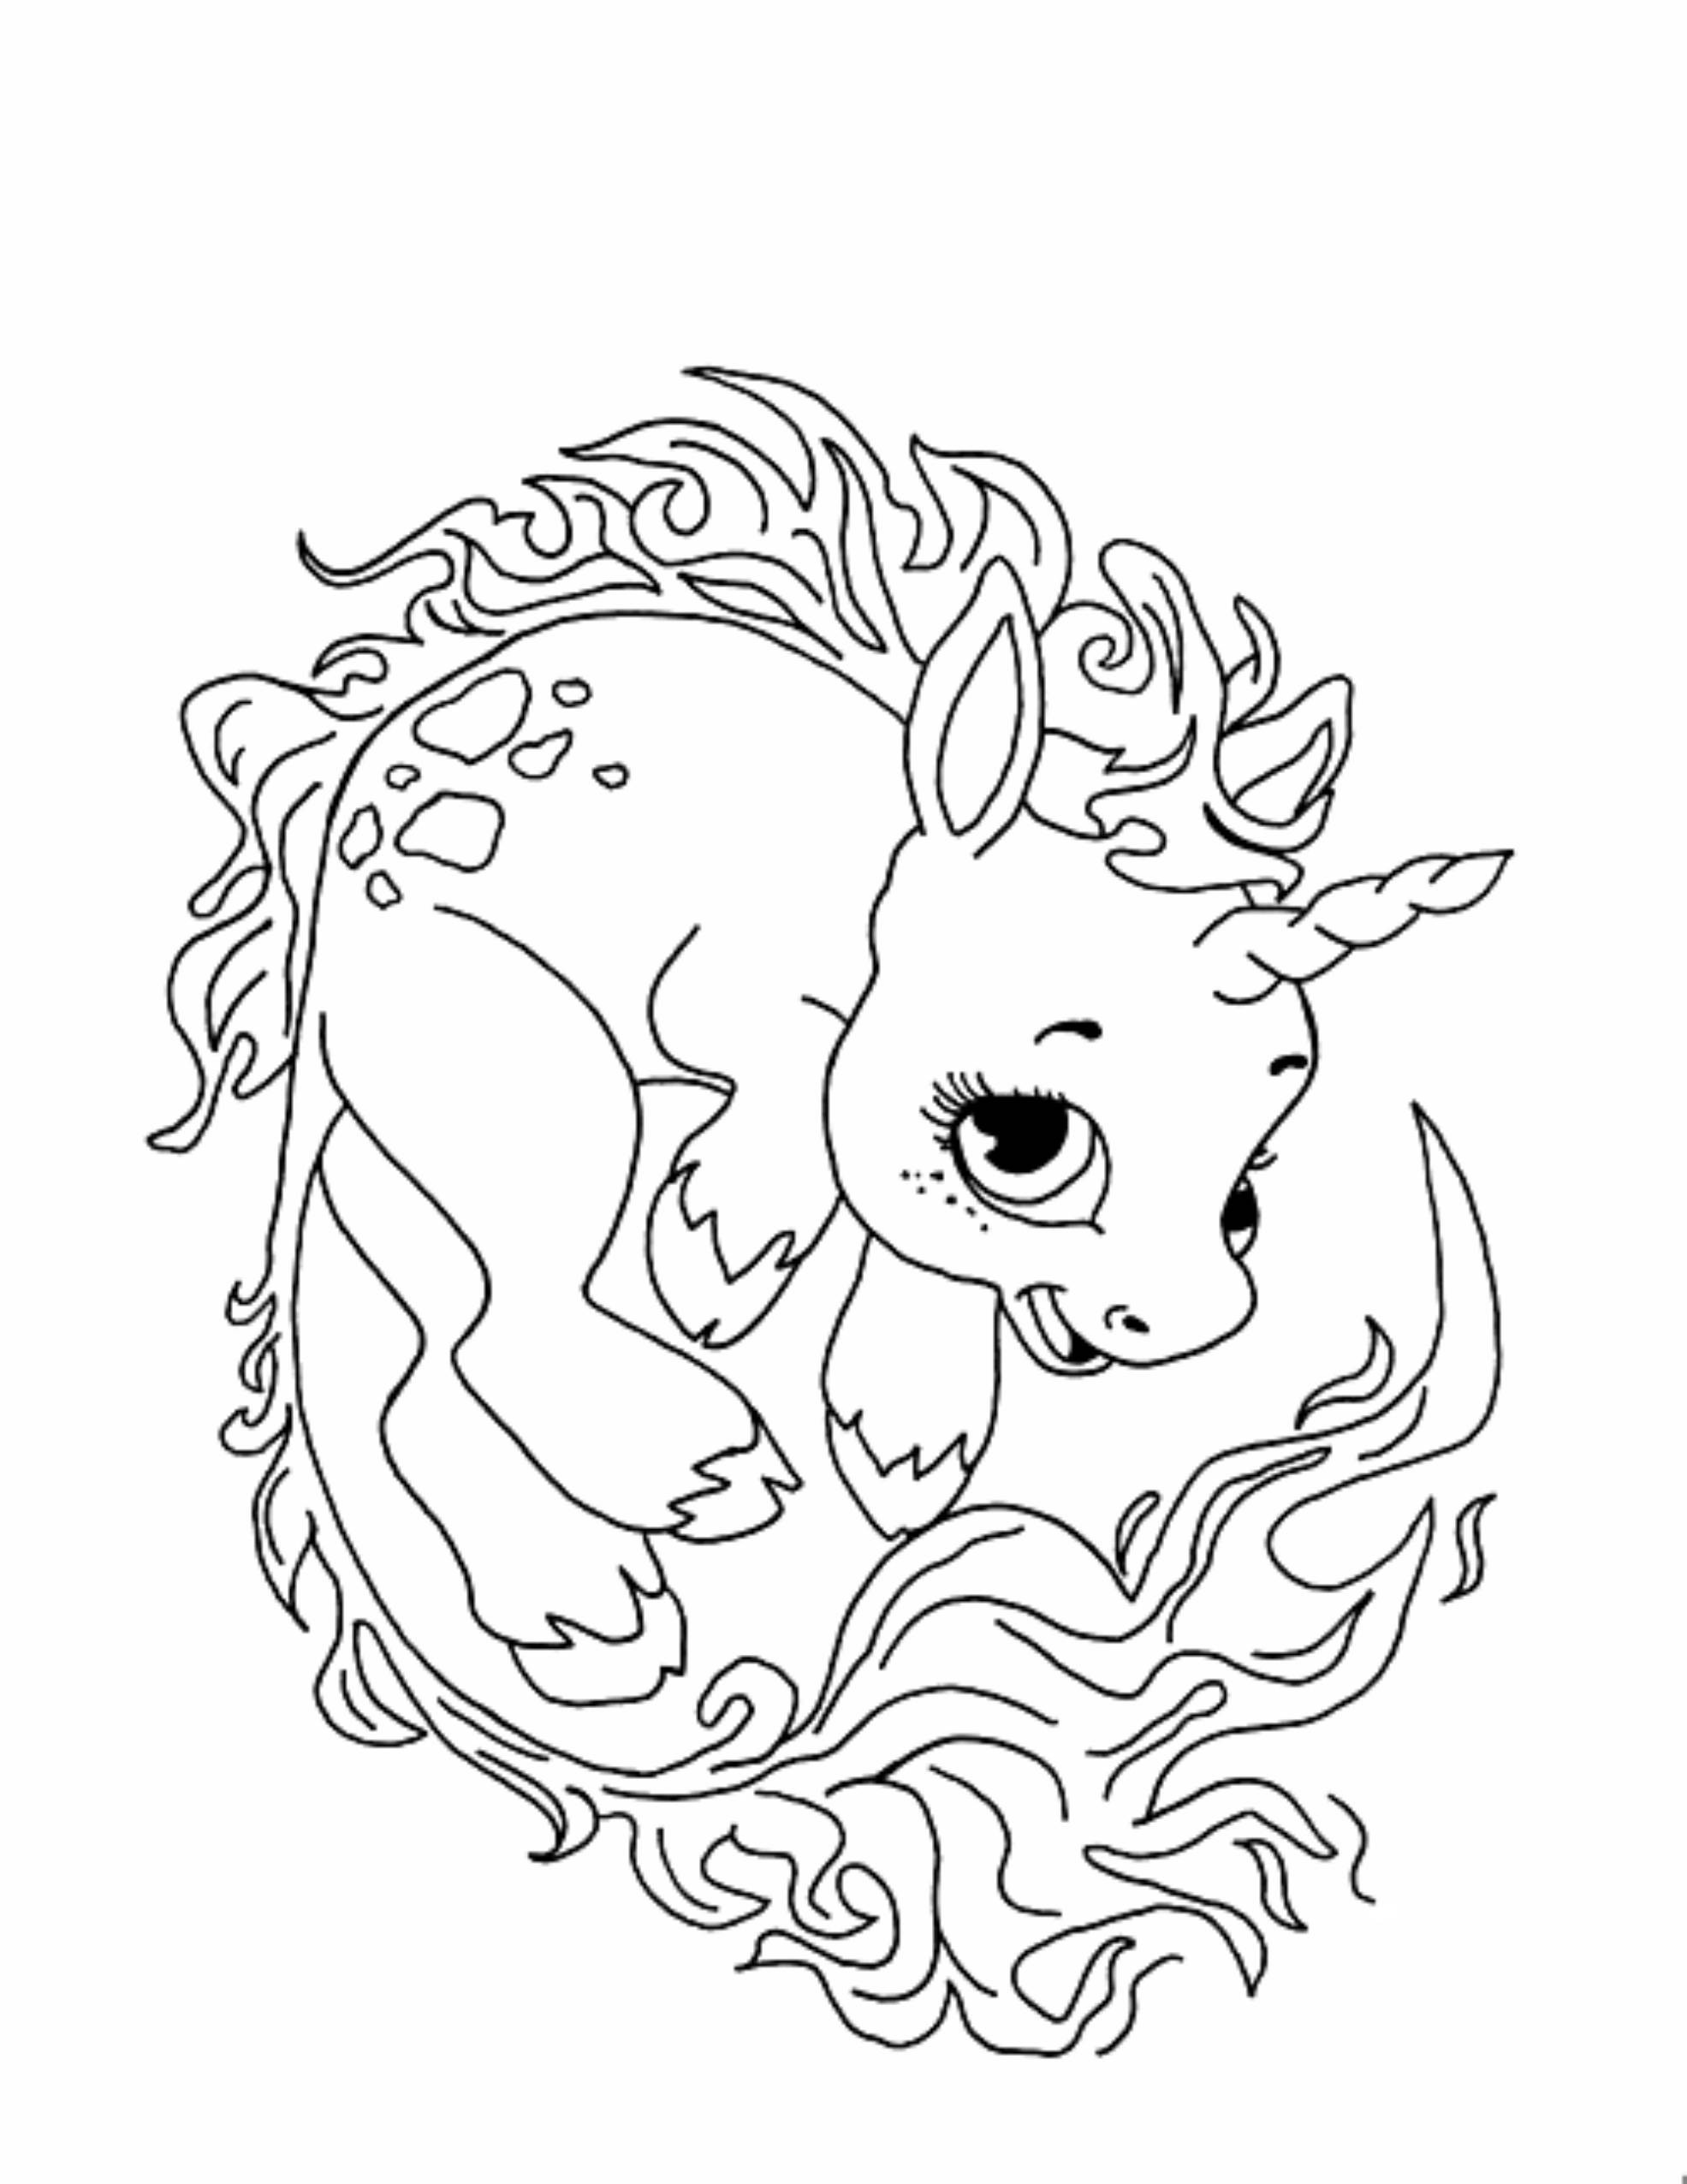 Coloring Sheets For Girls Unicorn
 Print & Download Unicorn Coloring Pages for Children